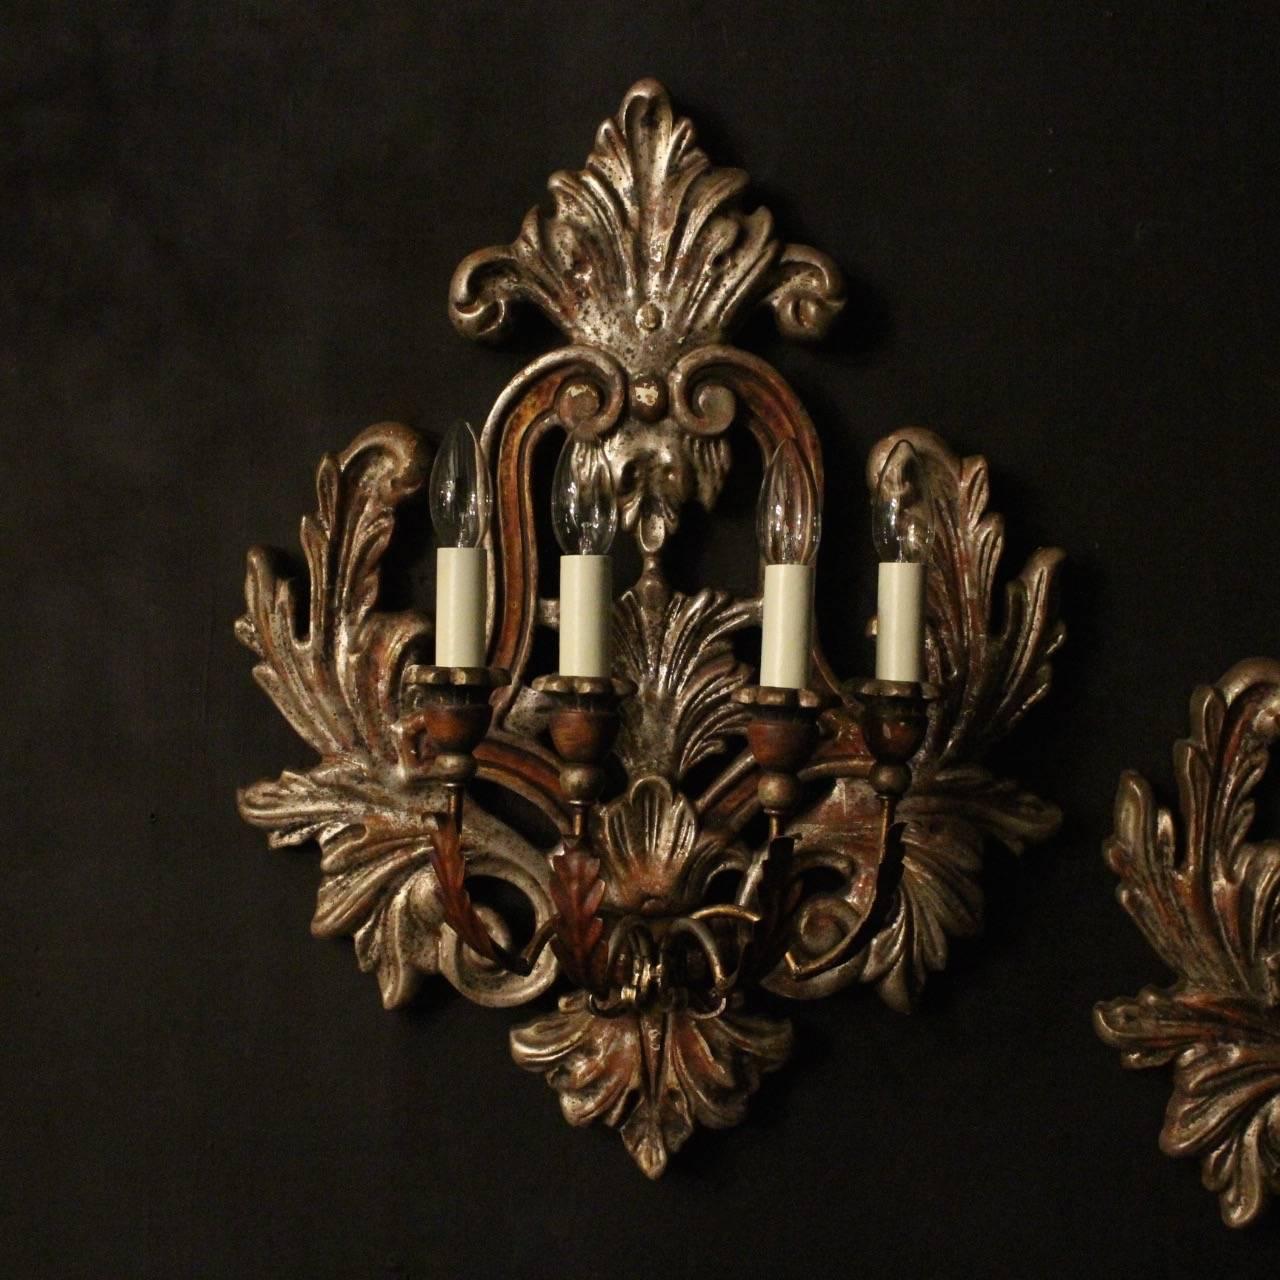 A decorative Italian carved giltwood and toleware four arm wall lights, the foliated toleware leaf scrolling arms with wooden bulbous candle sconces, issuing from an ornate pierced Acanthus leaf silvered wooden backplate, very decorative, nice